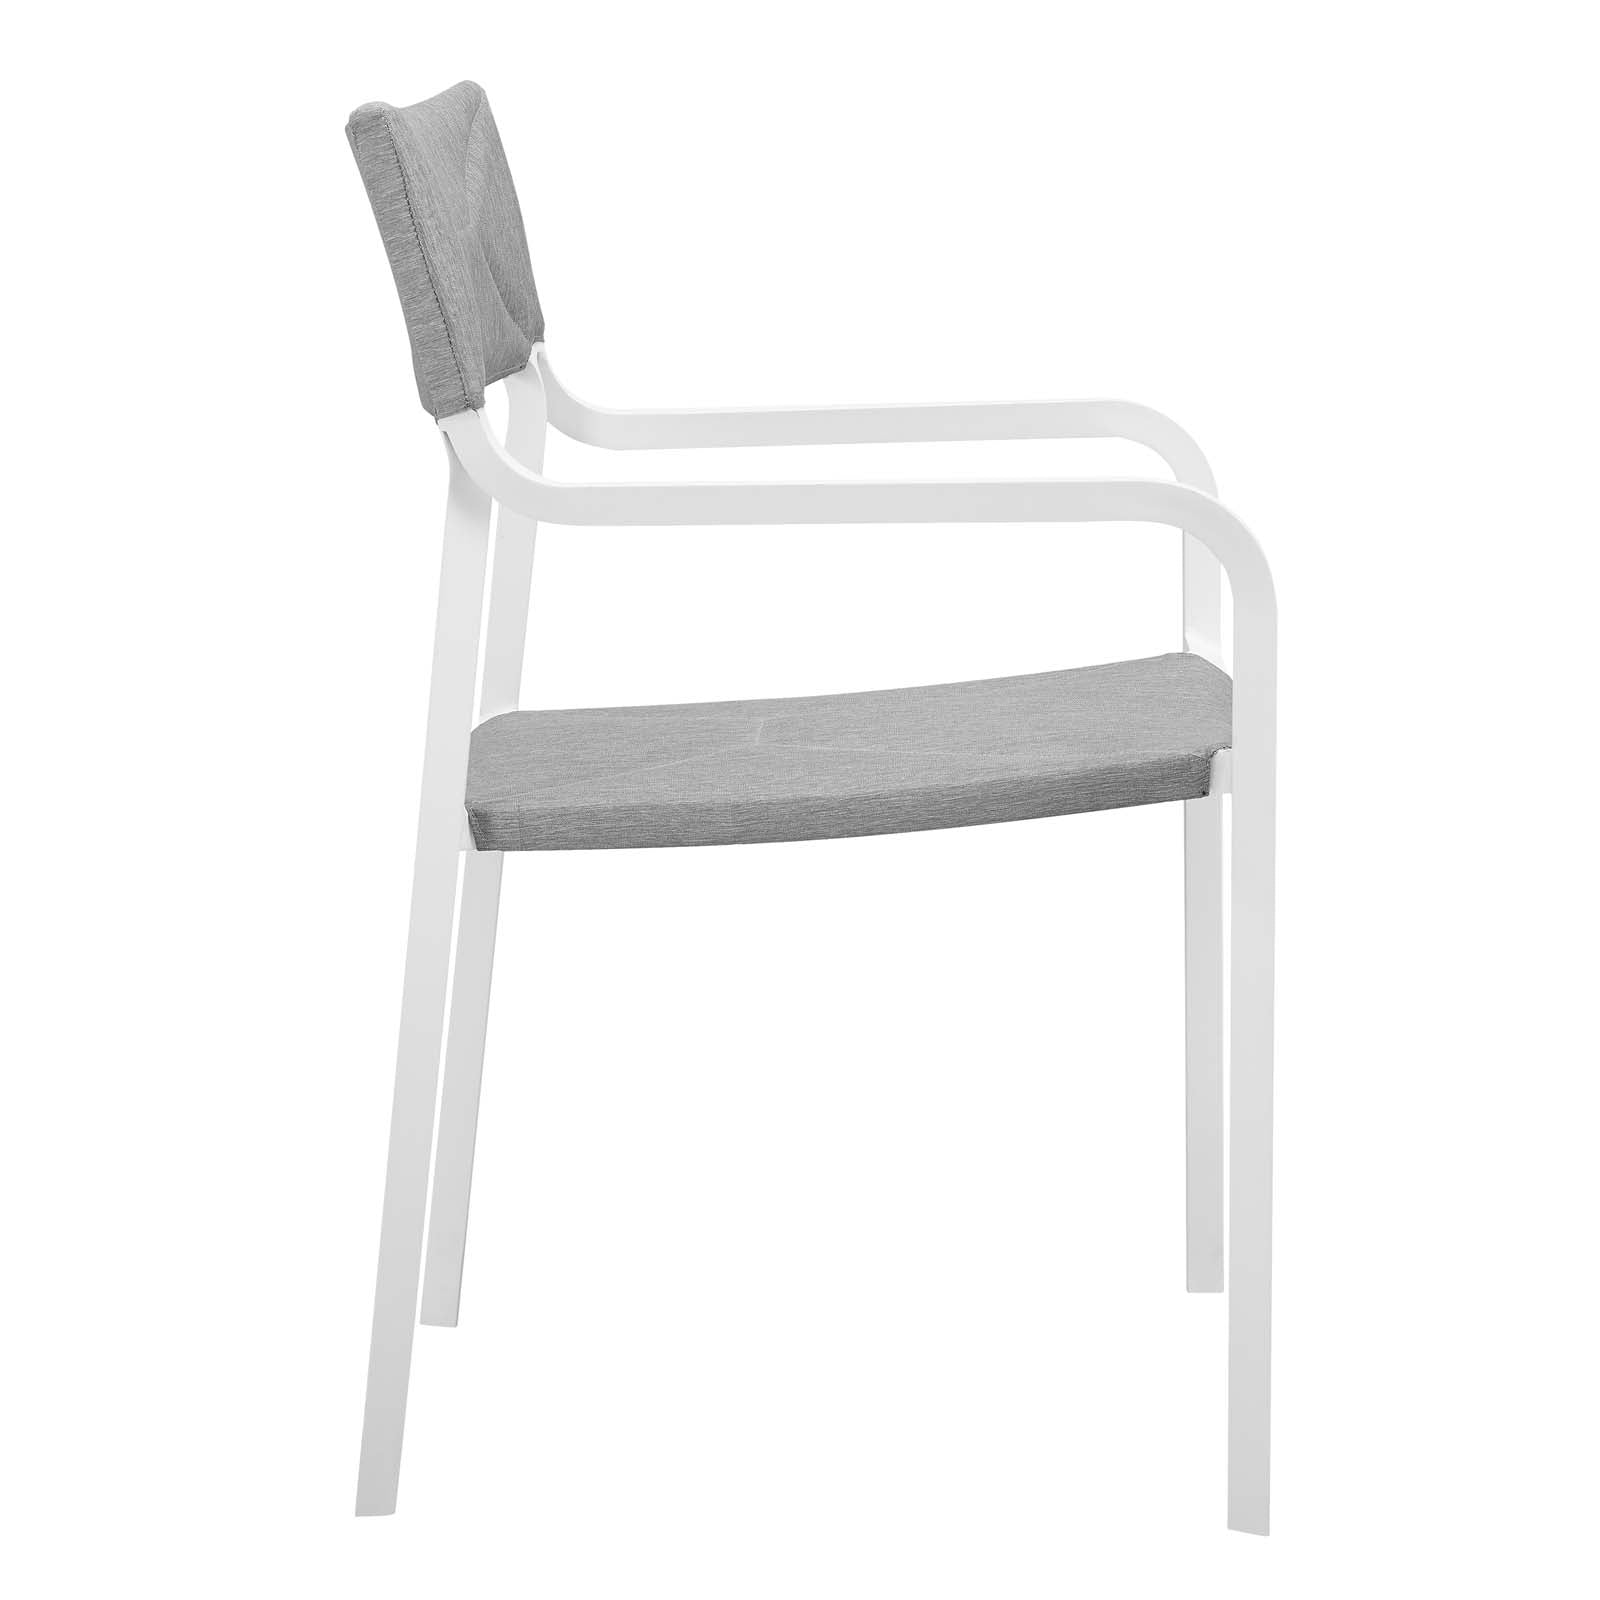 Modway Outdoor Chairs - Raleigh Outdoor Patio Aluminum Armchair Set of 2 White Gray